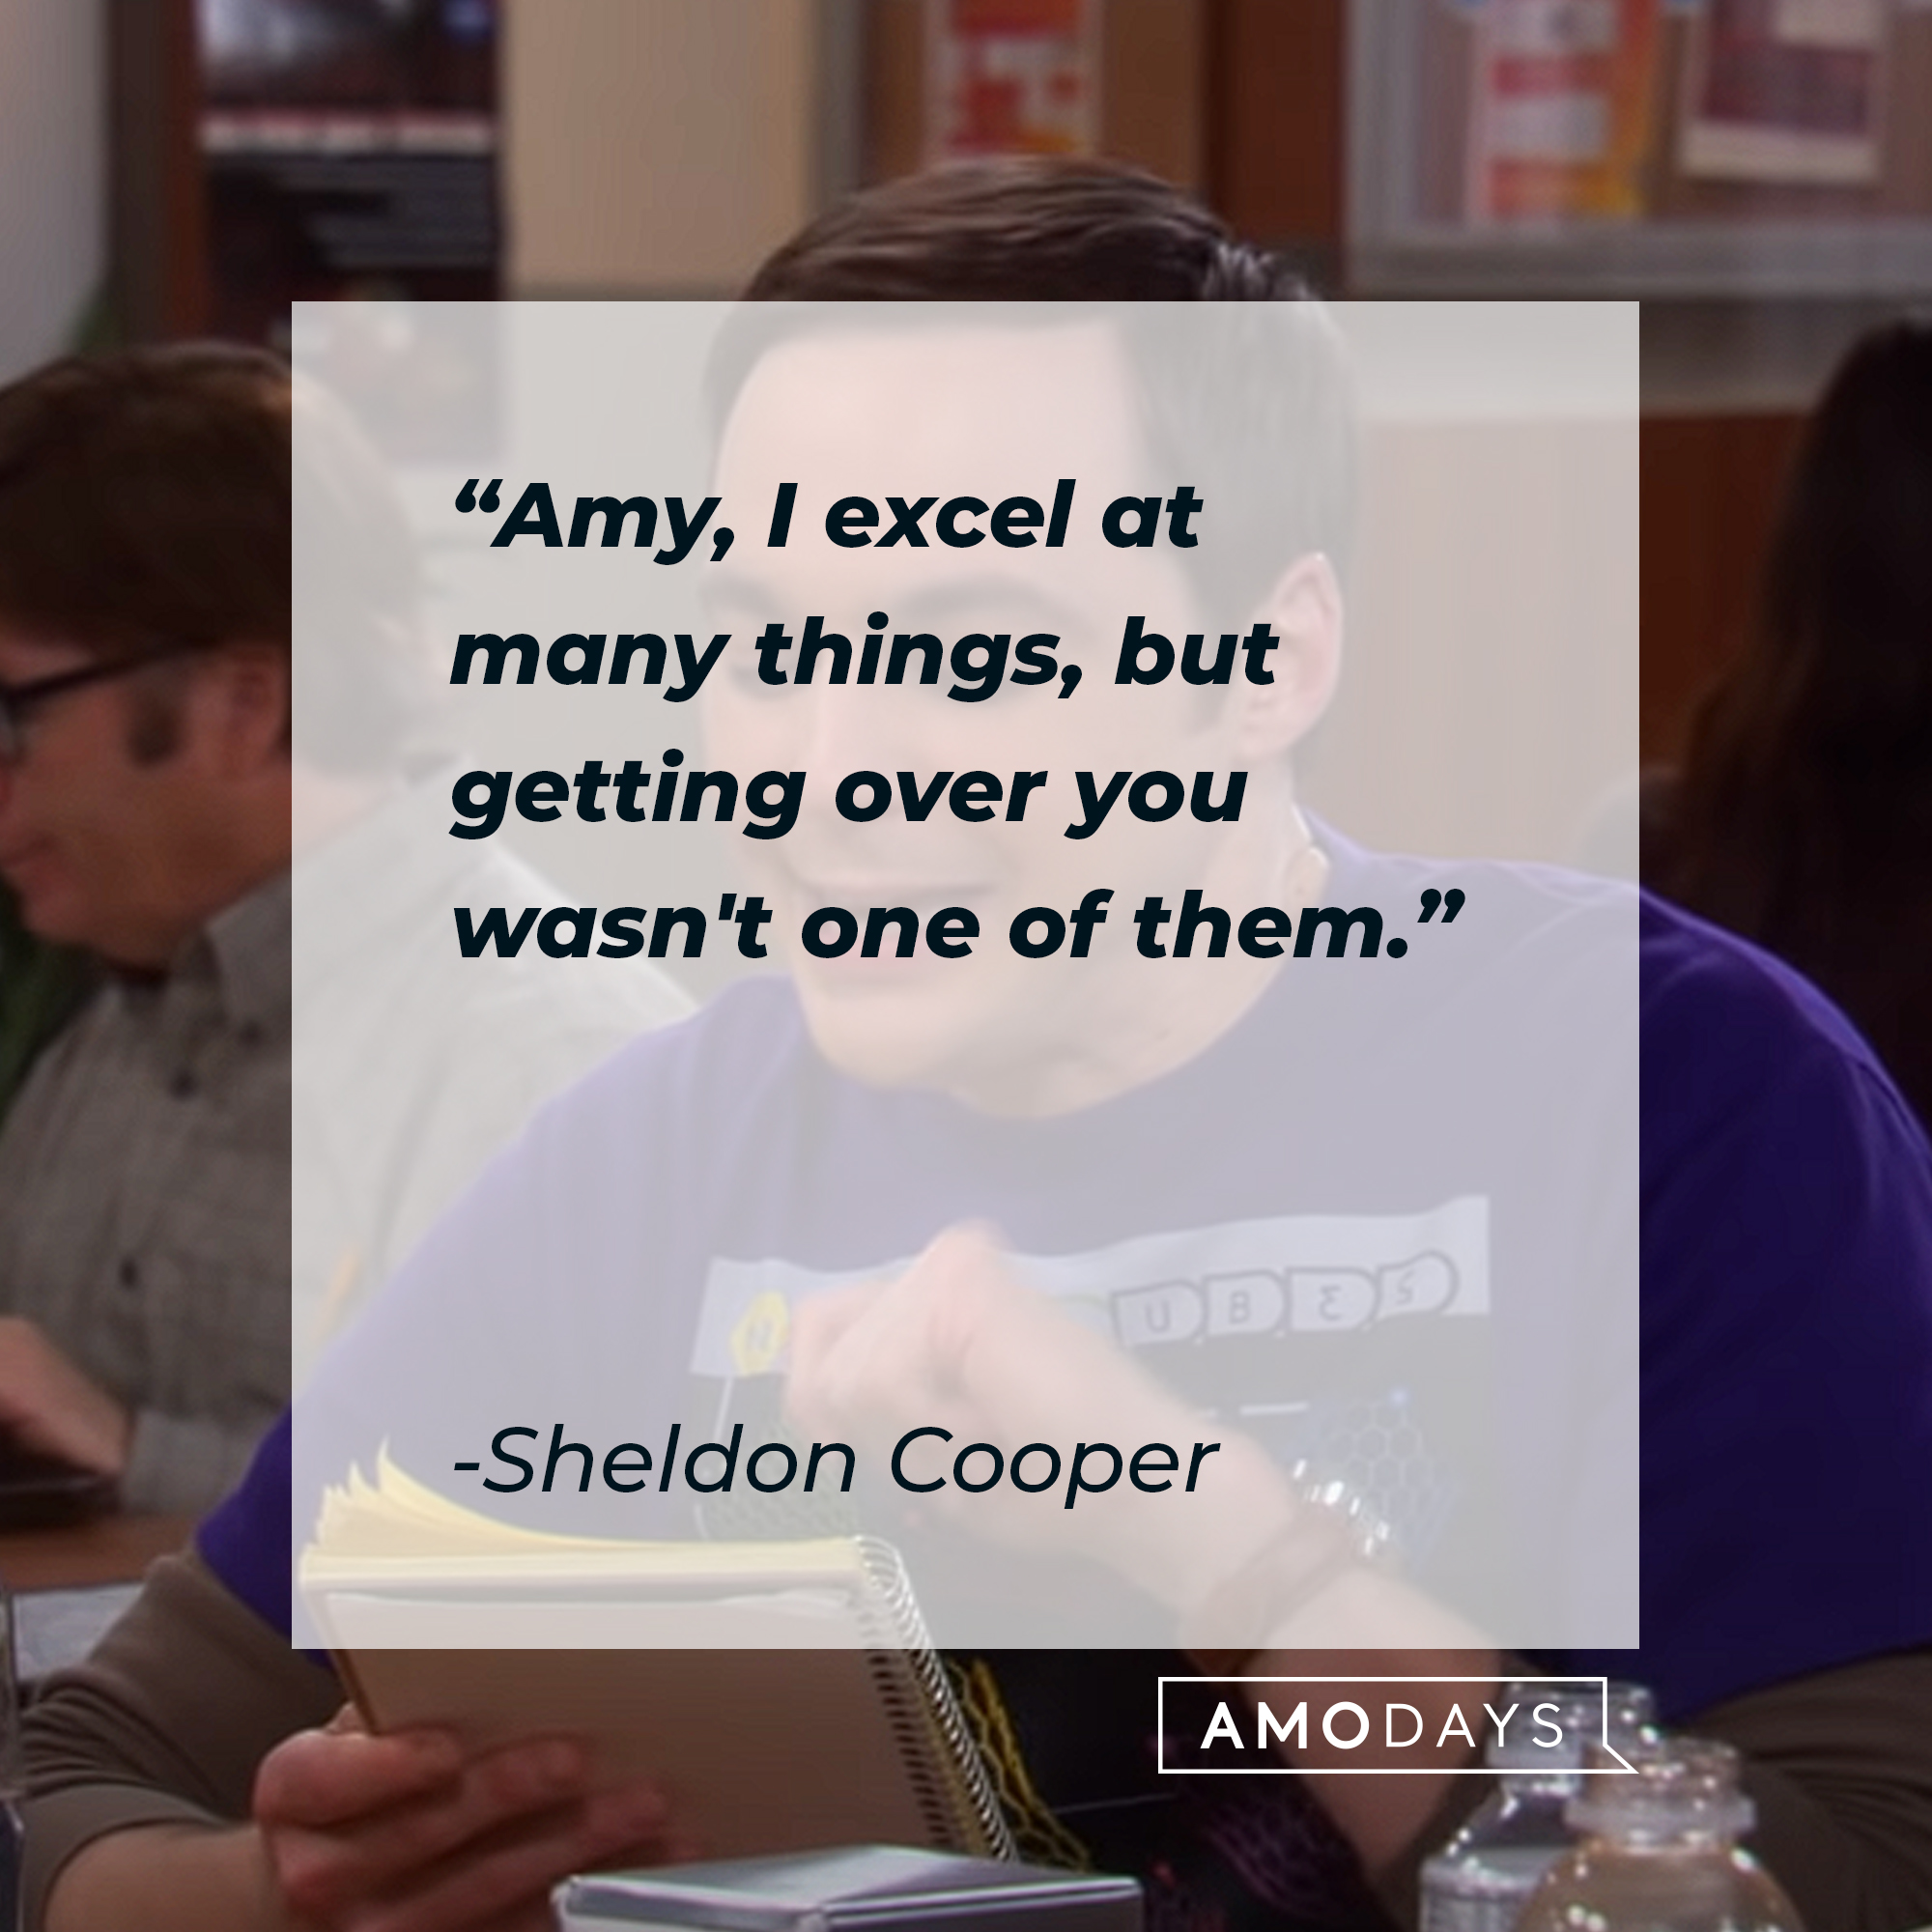 Sheldon Cooper's quote: "Amy, I excel at many things, but getting over you wasn't one of them." | Source: youtube.com/warnerbrostv